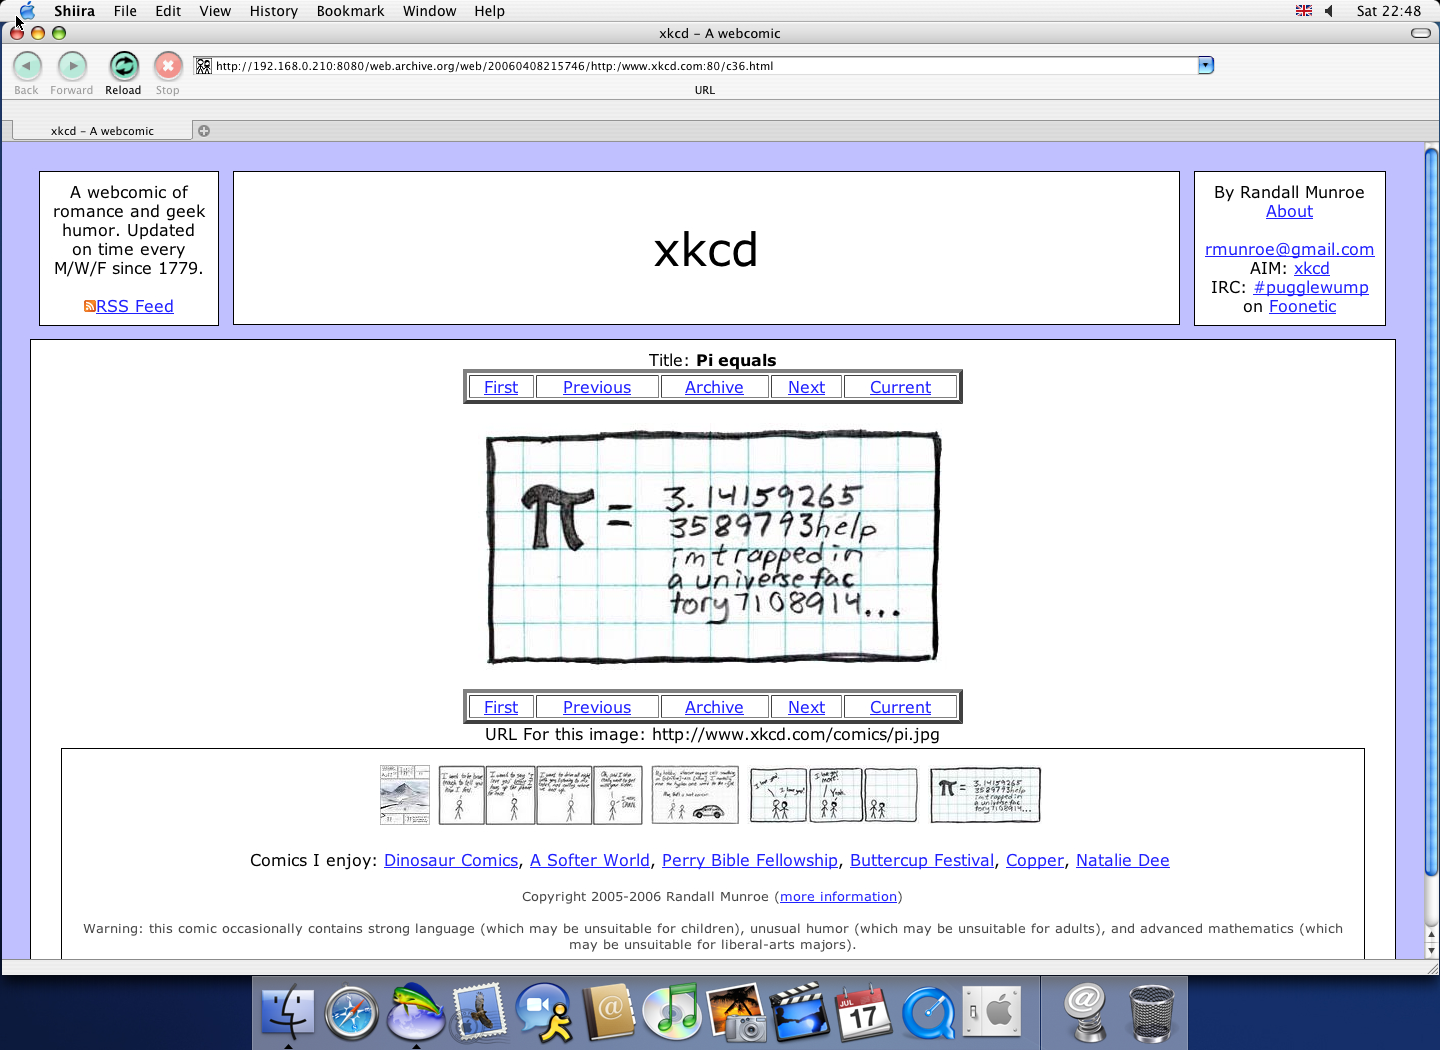 OS X 10.3 PPC with Shiira 0.9.1 displaying a page from XKCD archived at April 08, 2006 at 21:57:46